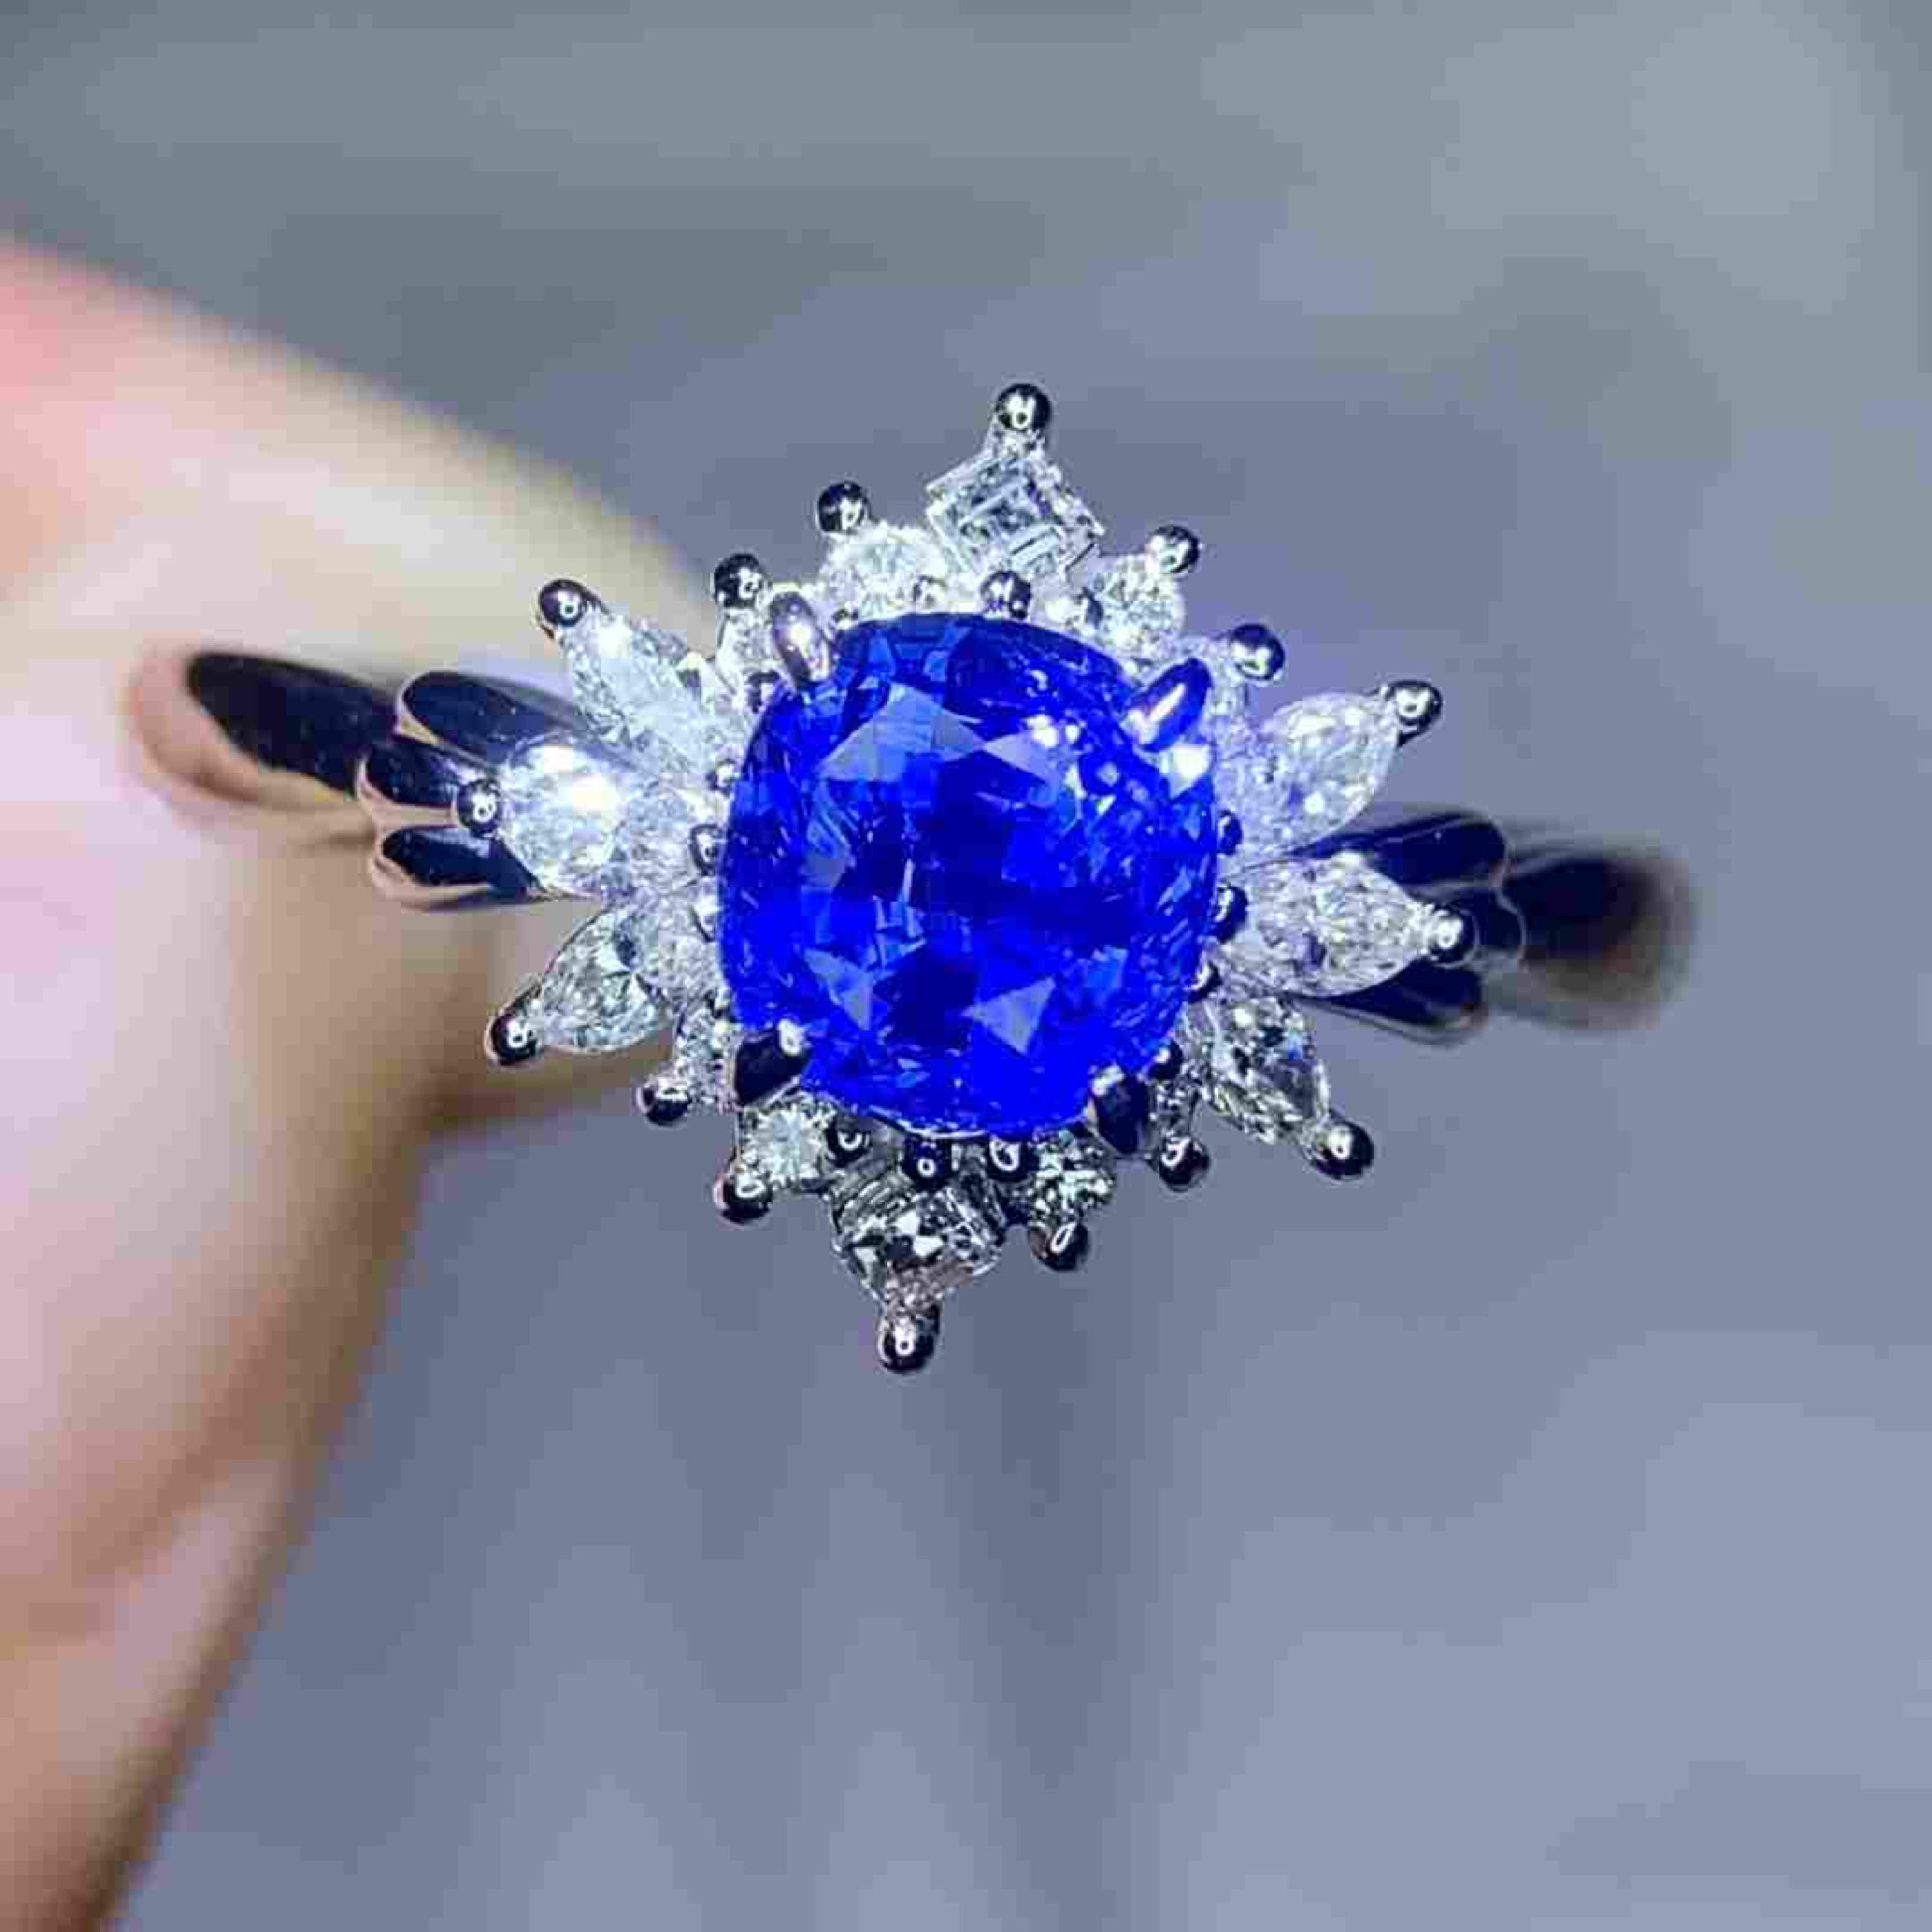 For Sale:  Vintage Sapphire Engagement Ring, Antique Natural Sapphire Wedding Ring 7